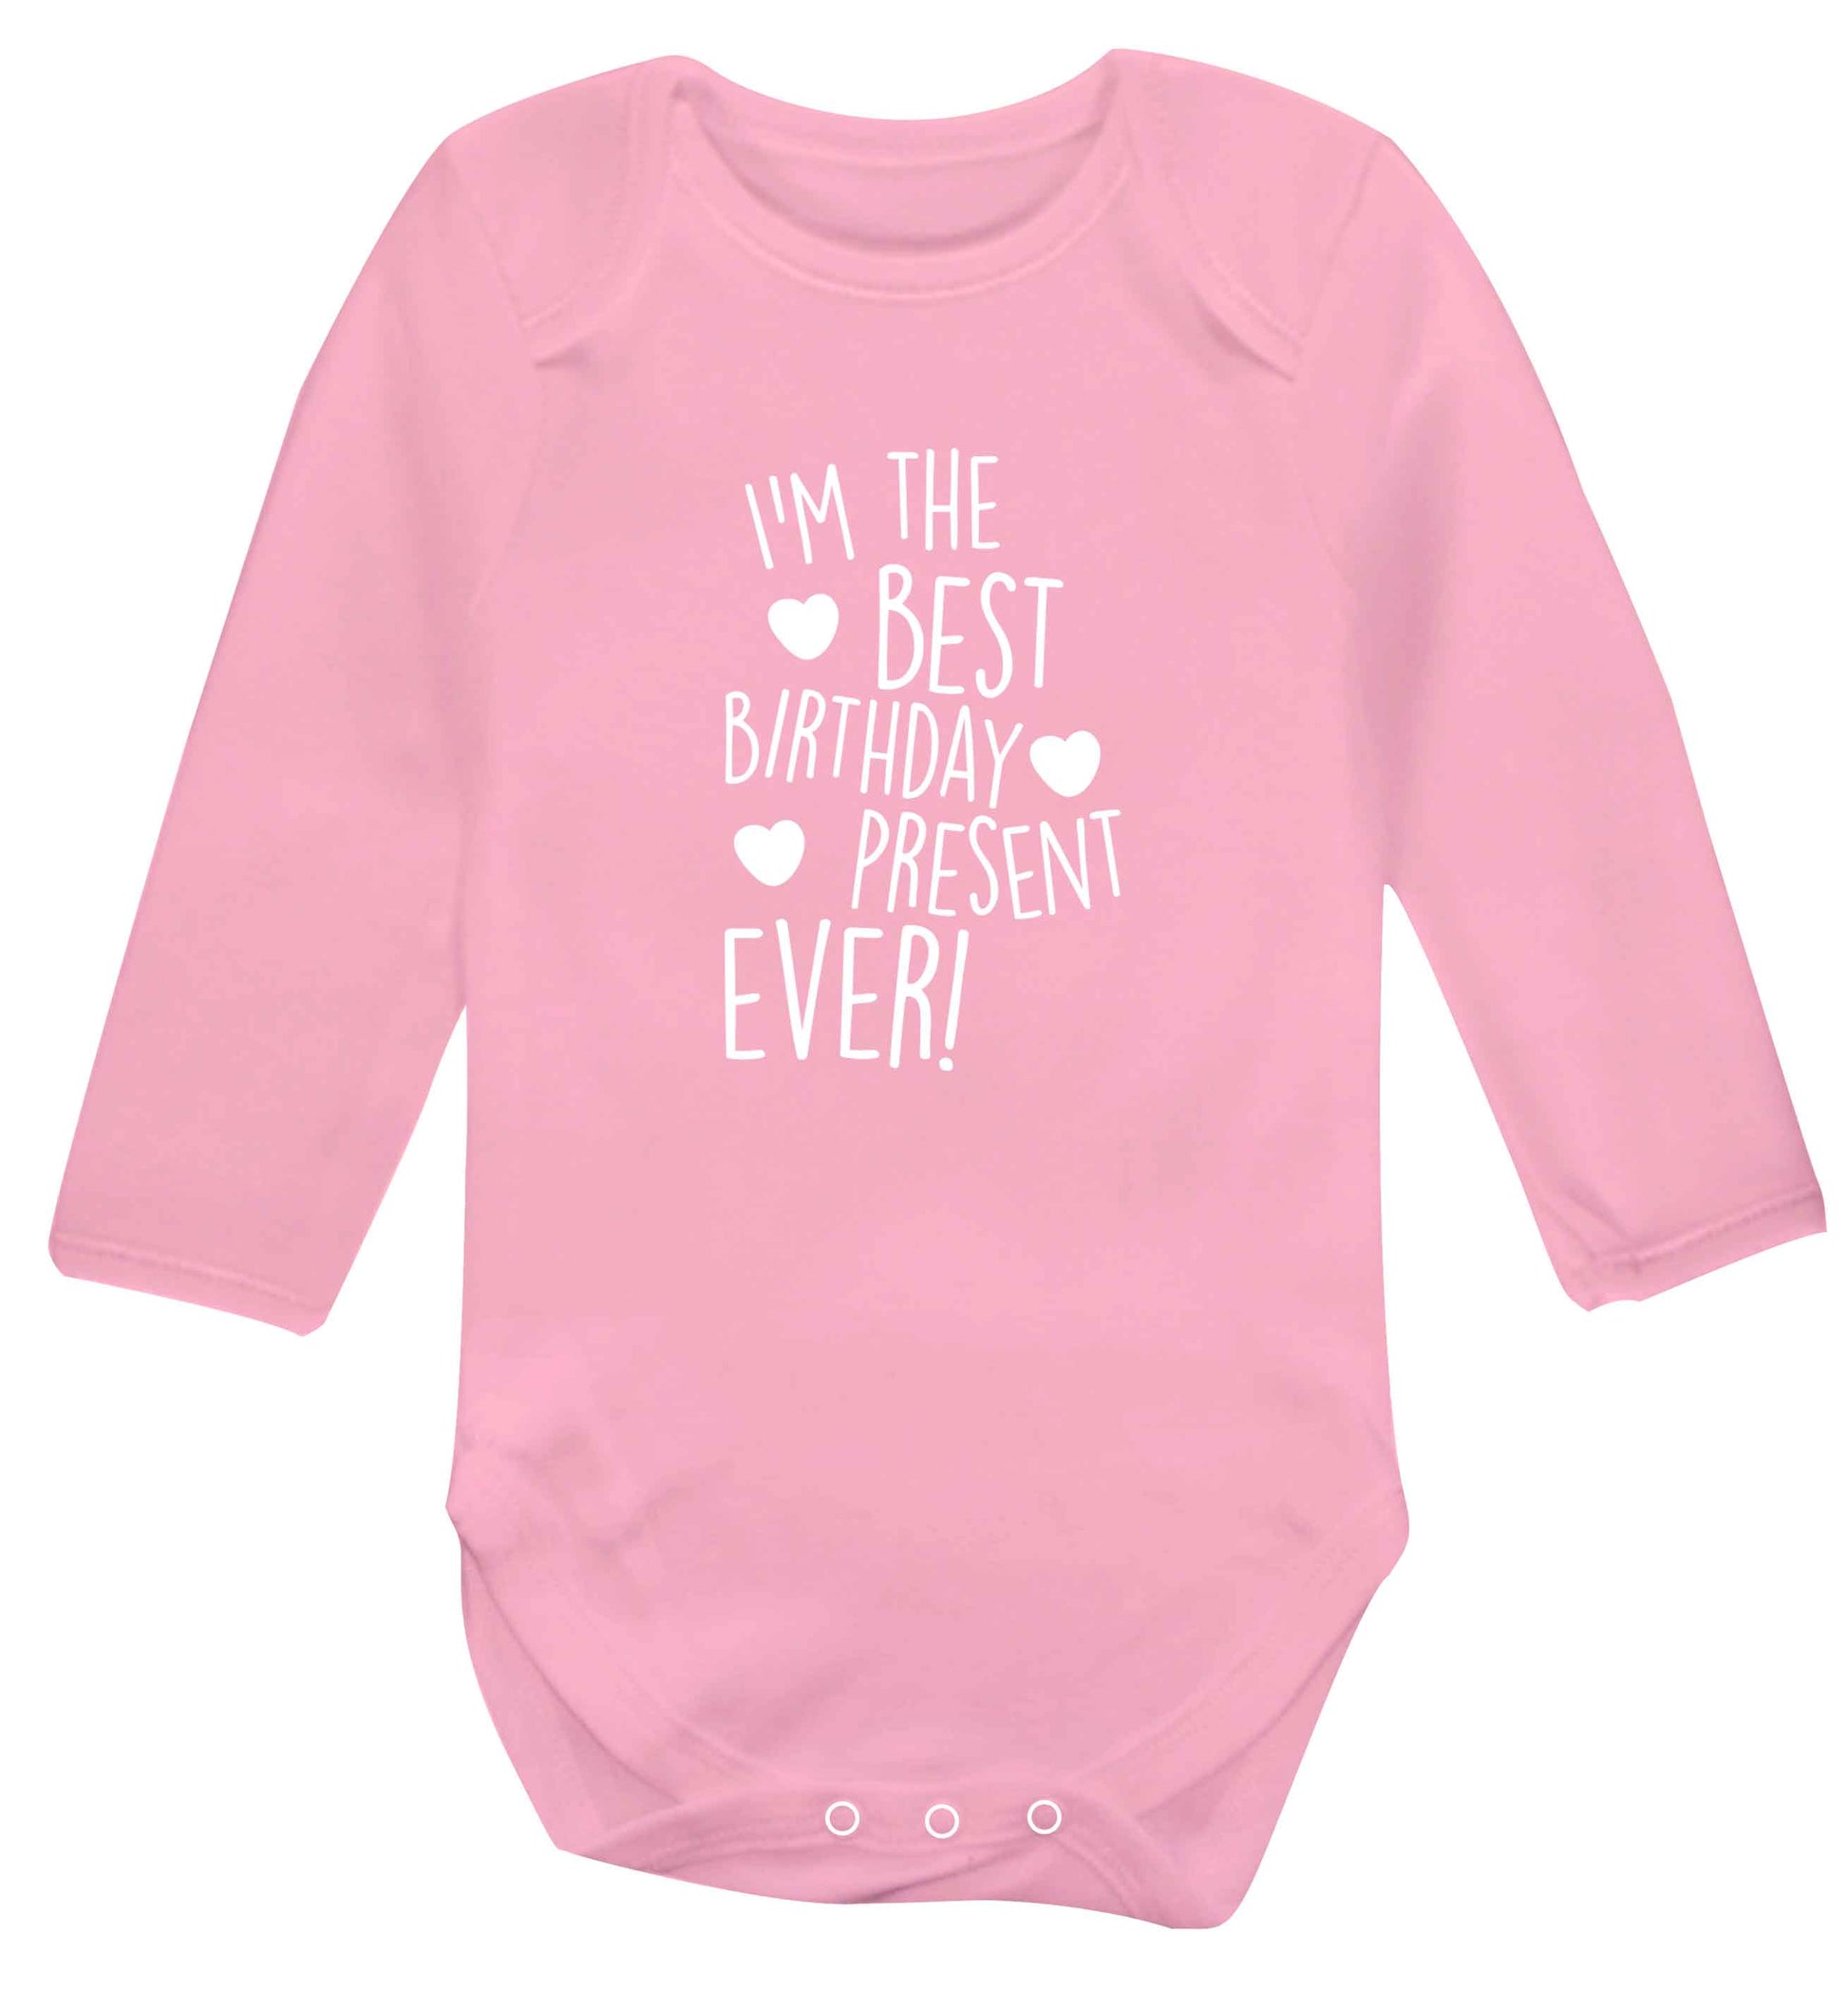 I'm the best birthday present ever baby vest long sleeved pale pink 6-12 months